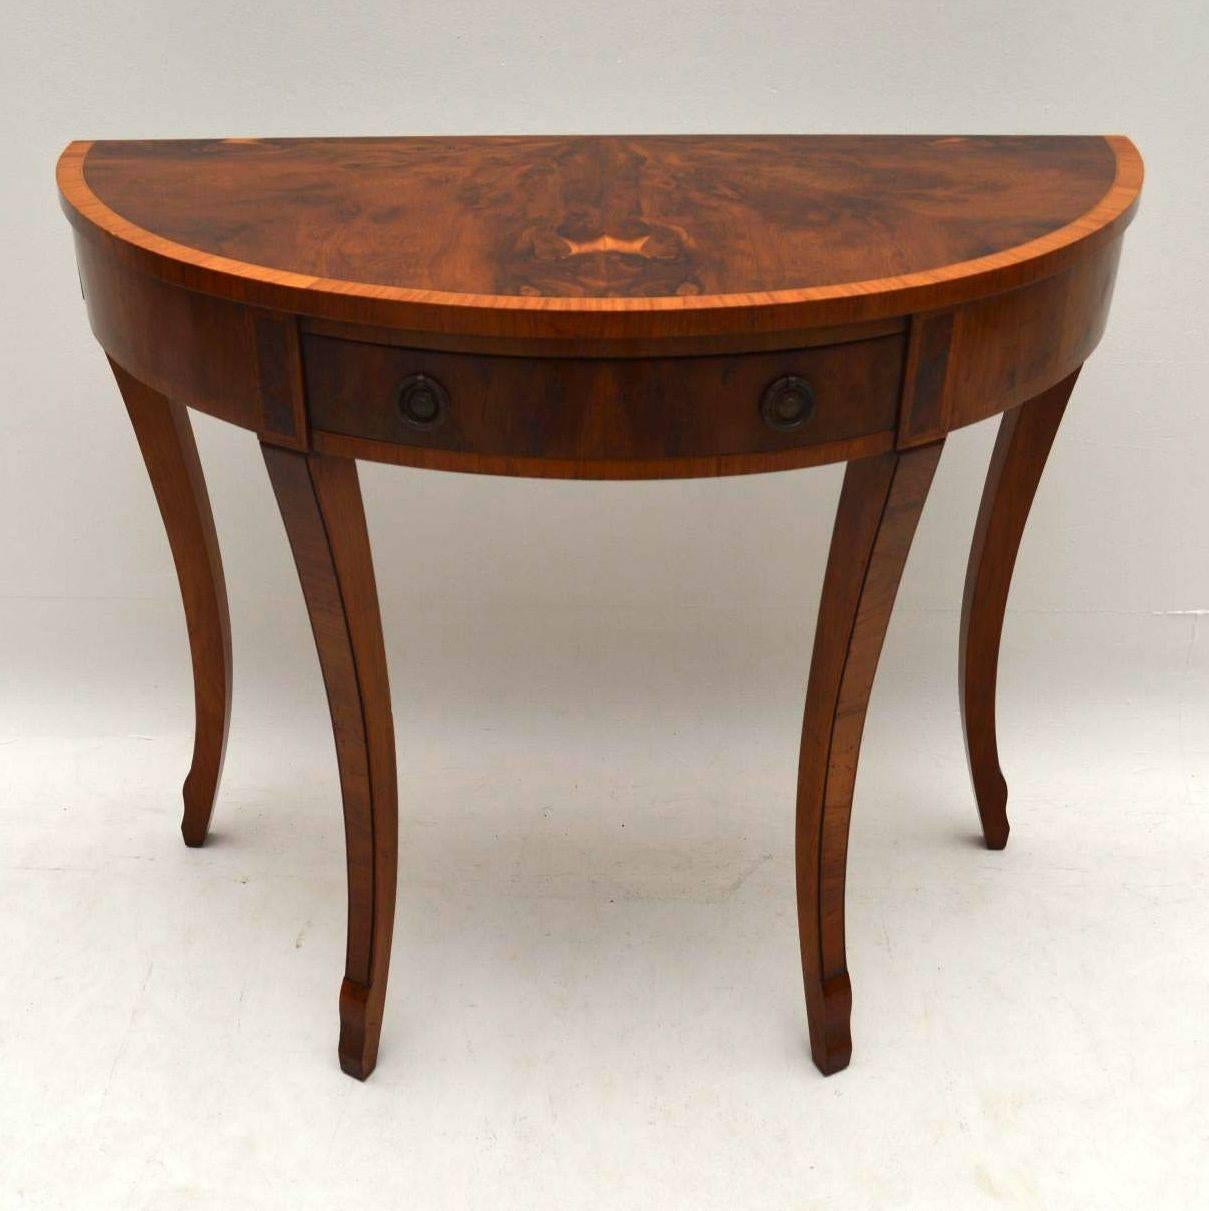 Antique yew wood console side table in excellent condition and dating from circa 1930-1950s period. The pattern in the veneers are beautiful & so is the color. The top has a lovely segmented pattern & also has a satinwood crossbanded edge. There is